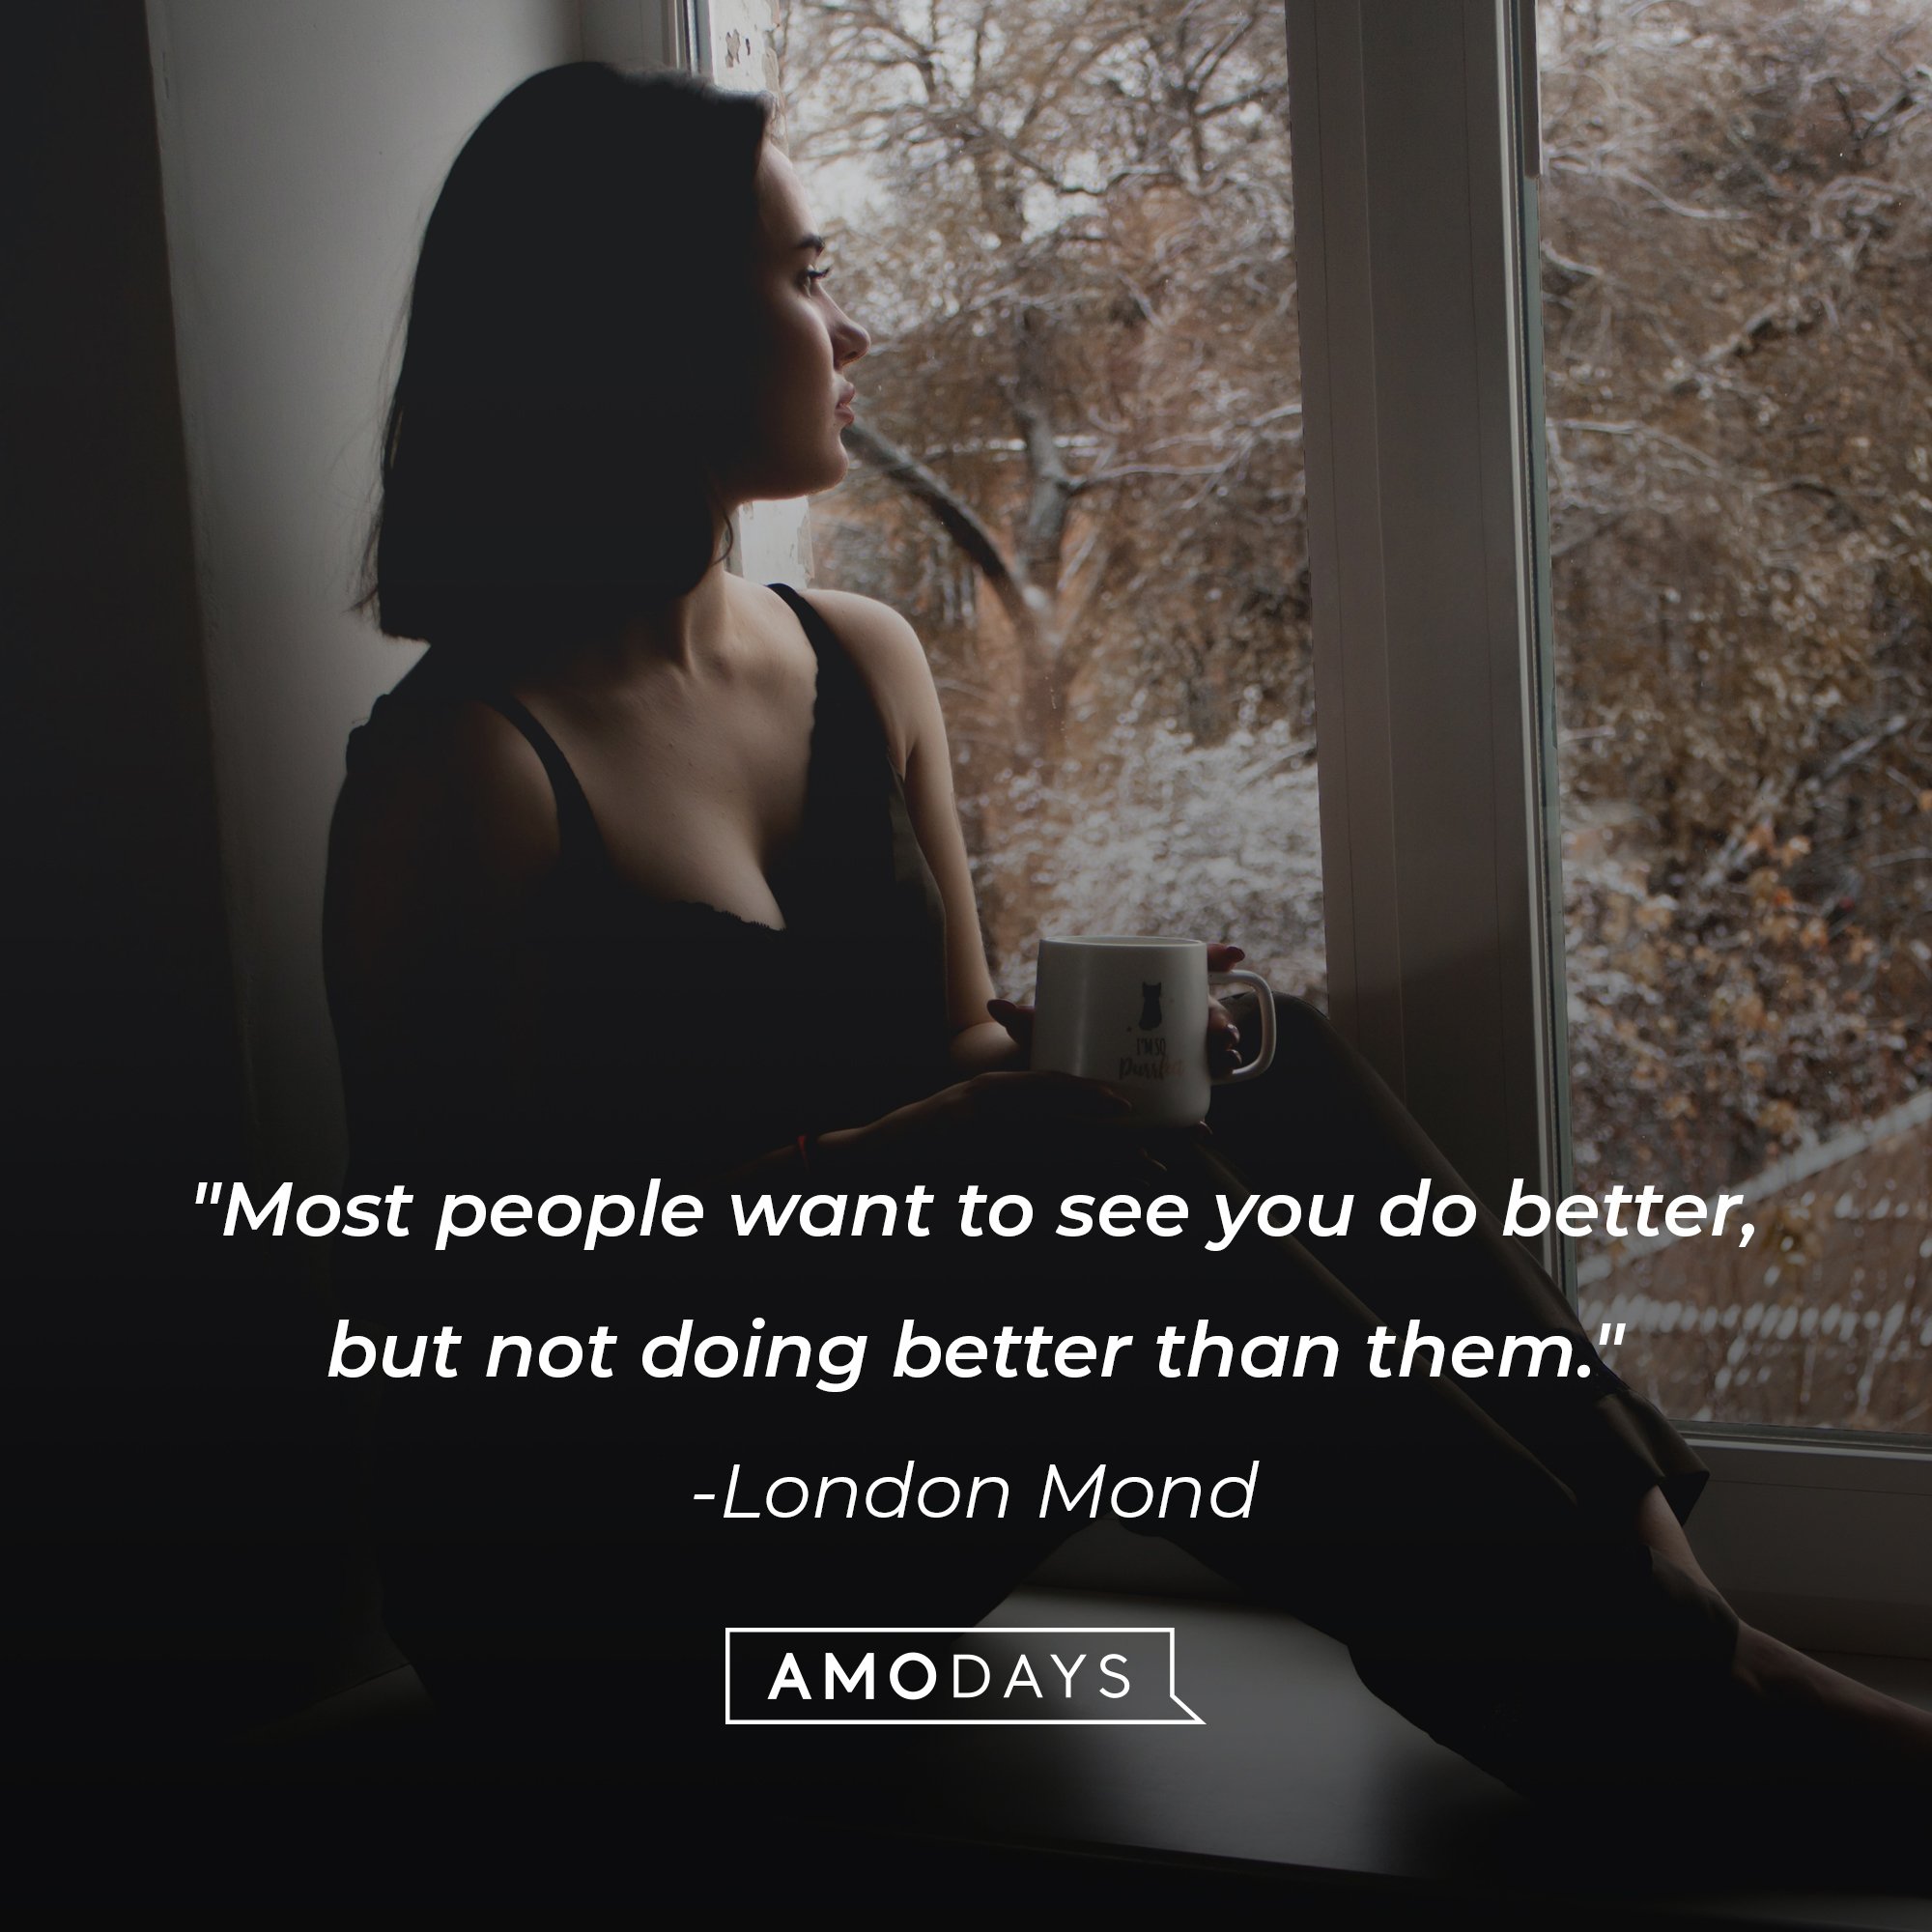  London Mond’s quote: "Most people want to see you do better, but not doing better than them." |  Image: AmoDays 